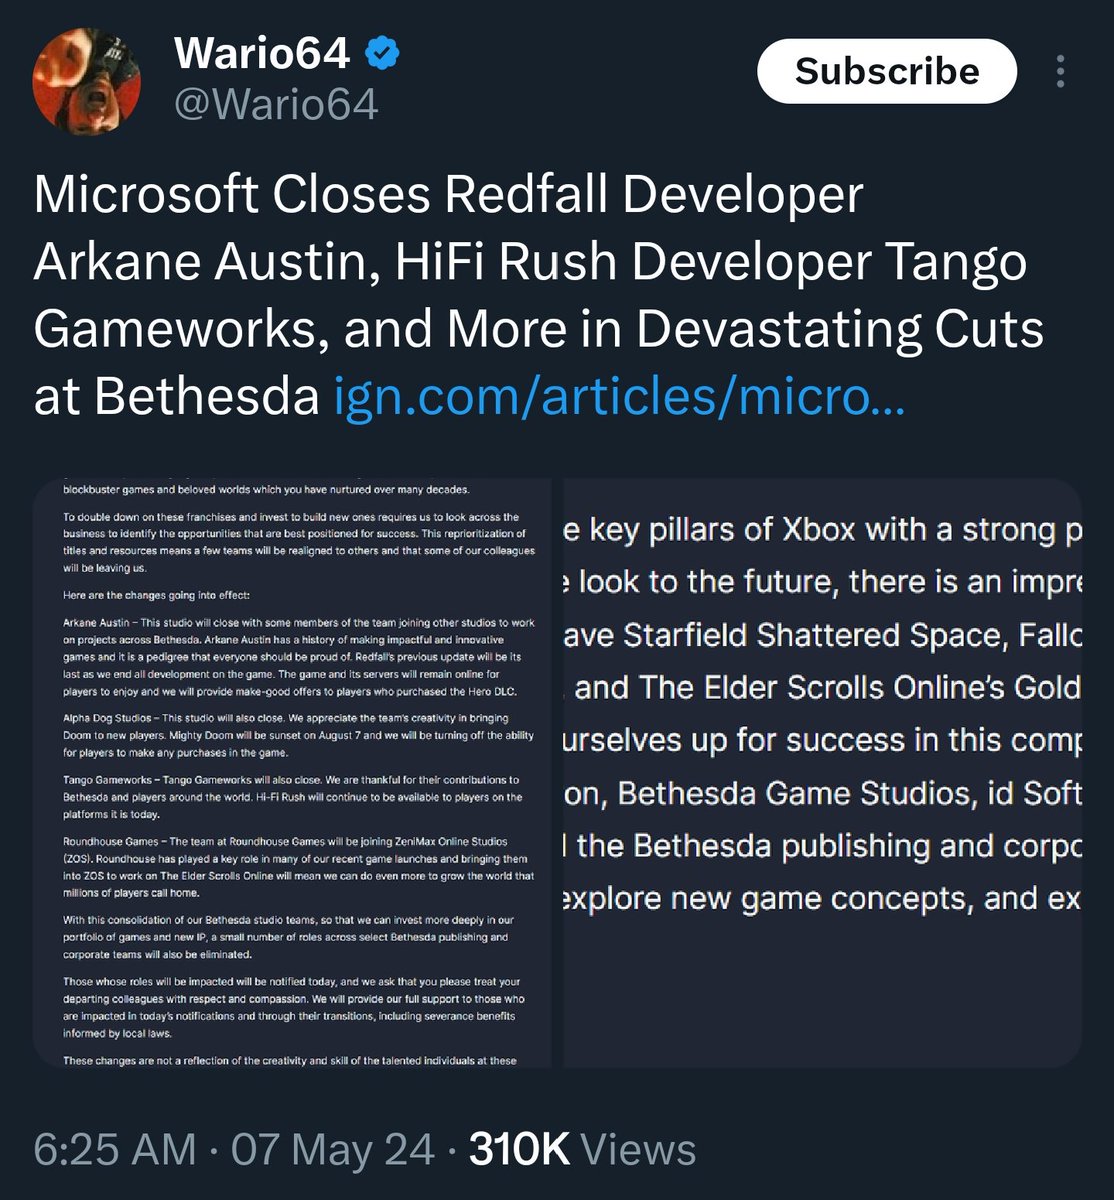 Holy ish... This is really bad guys. Arcane Austin AND Tango Gameworks. What is Microsoft doing here...